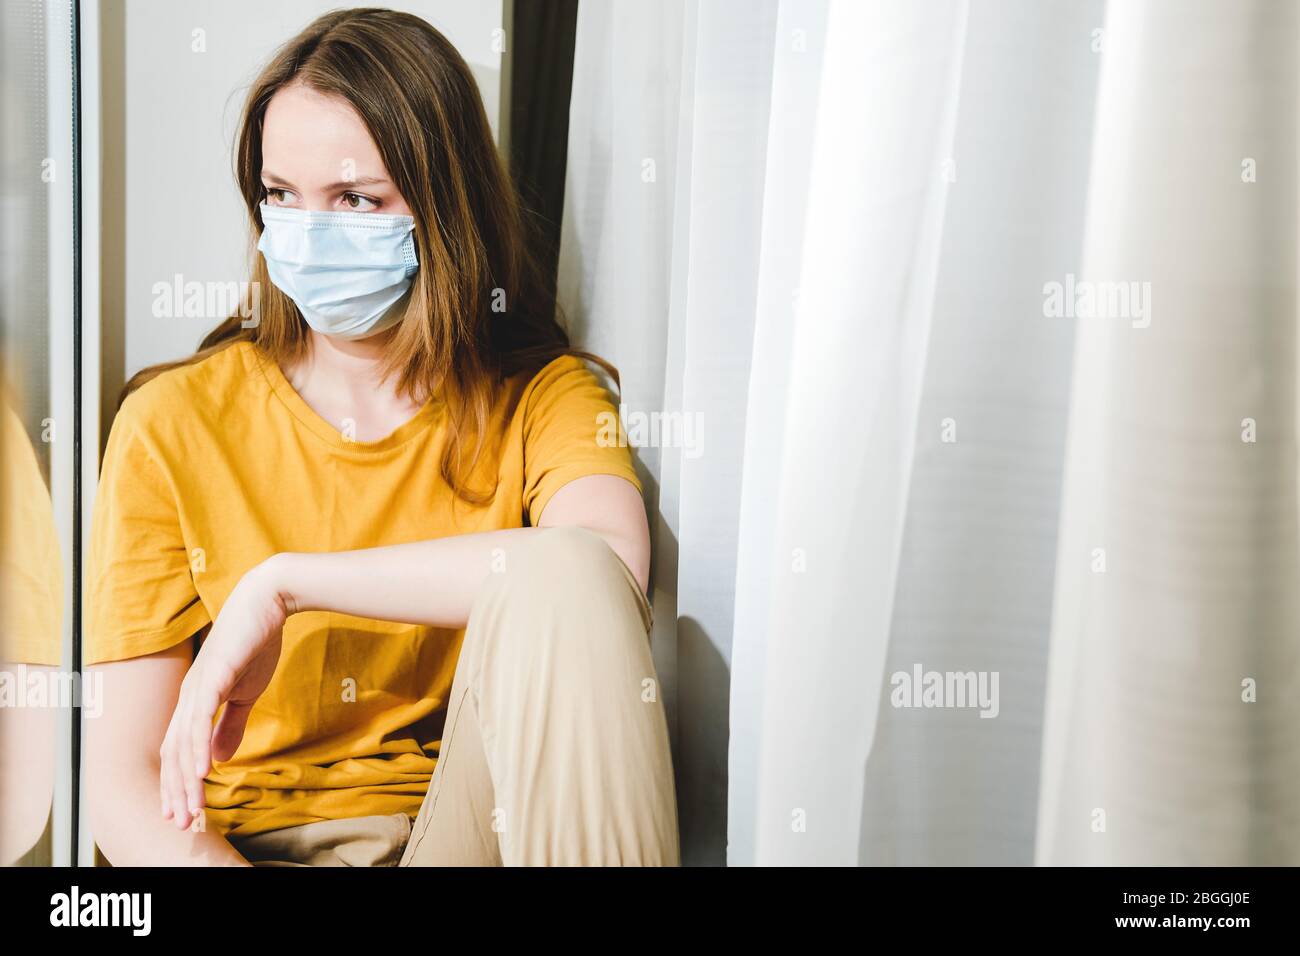 Sad girl in medical protective mask and yellow t-shirt sitting on the windowsill during a pandemic quarantine coronavirus Covid-19. Isolation at home Stock Photo